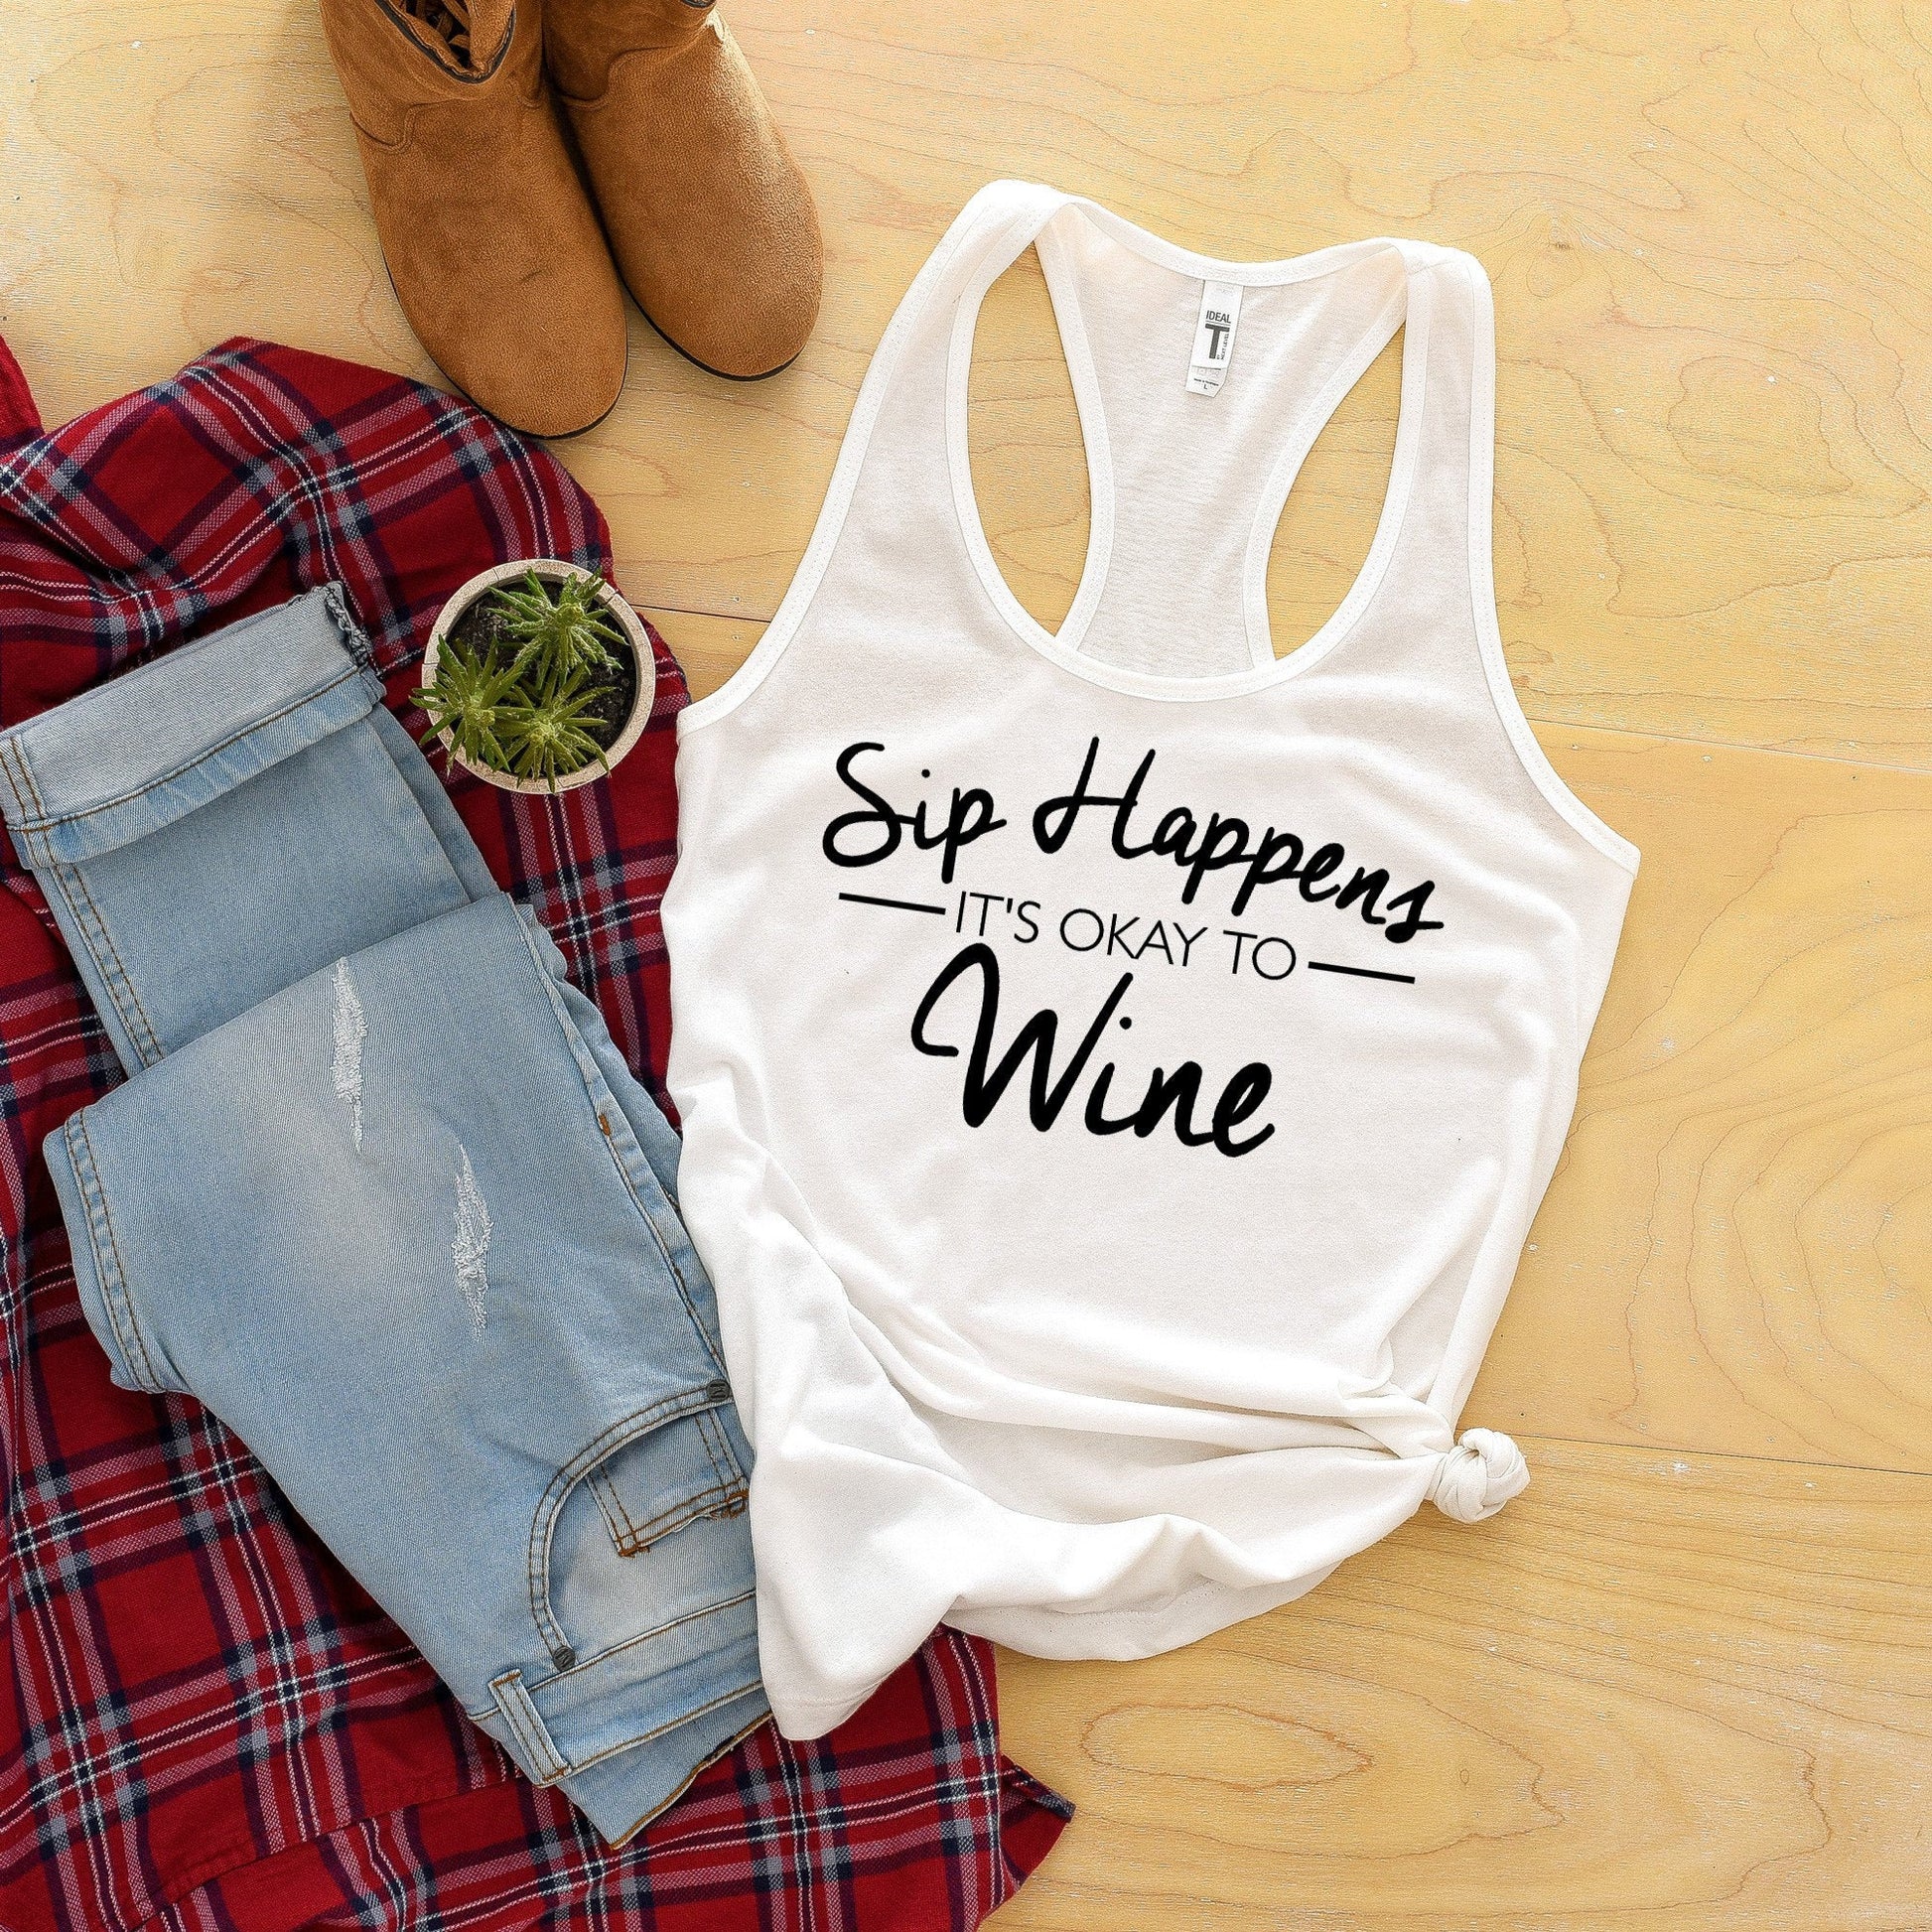 sip happens, it's okay to wine racerback tank top - wine tank top - wine tasting - mom tank top - wine lover gift - funny wine shirt for her